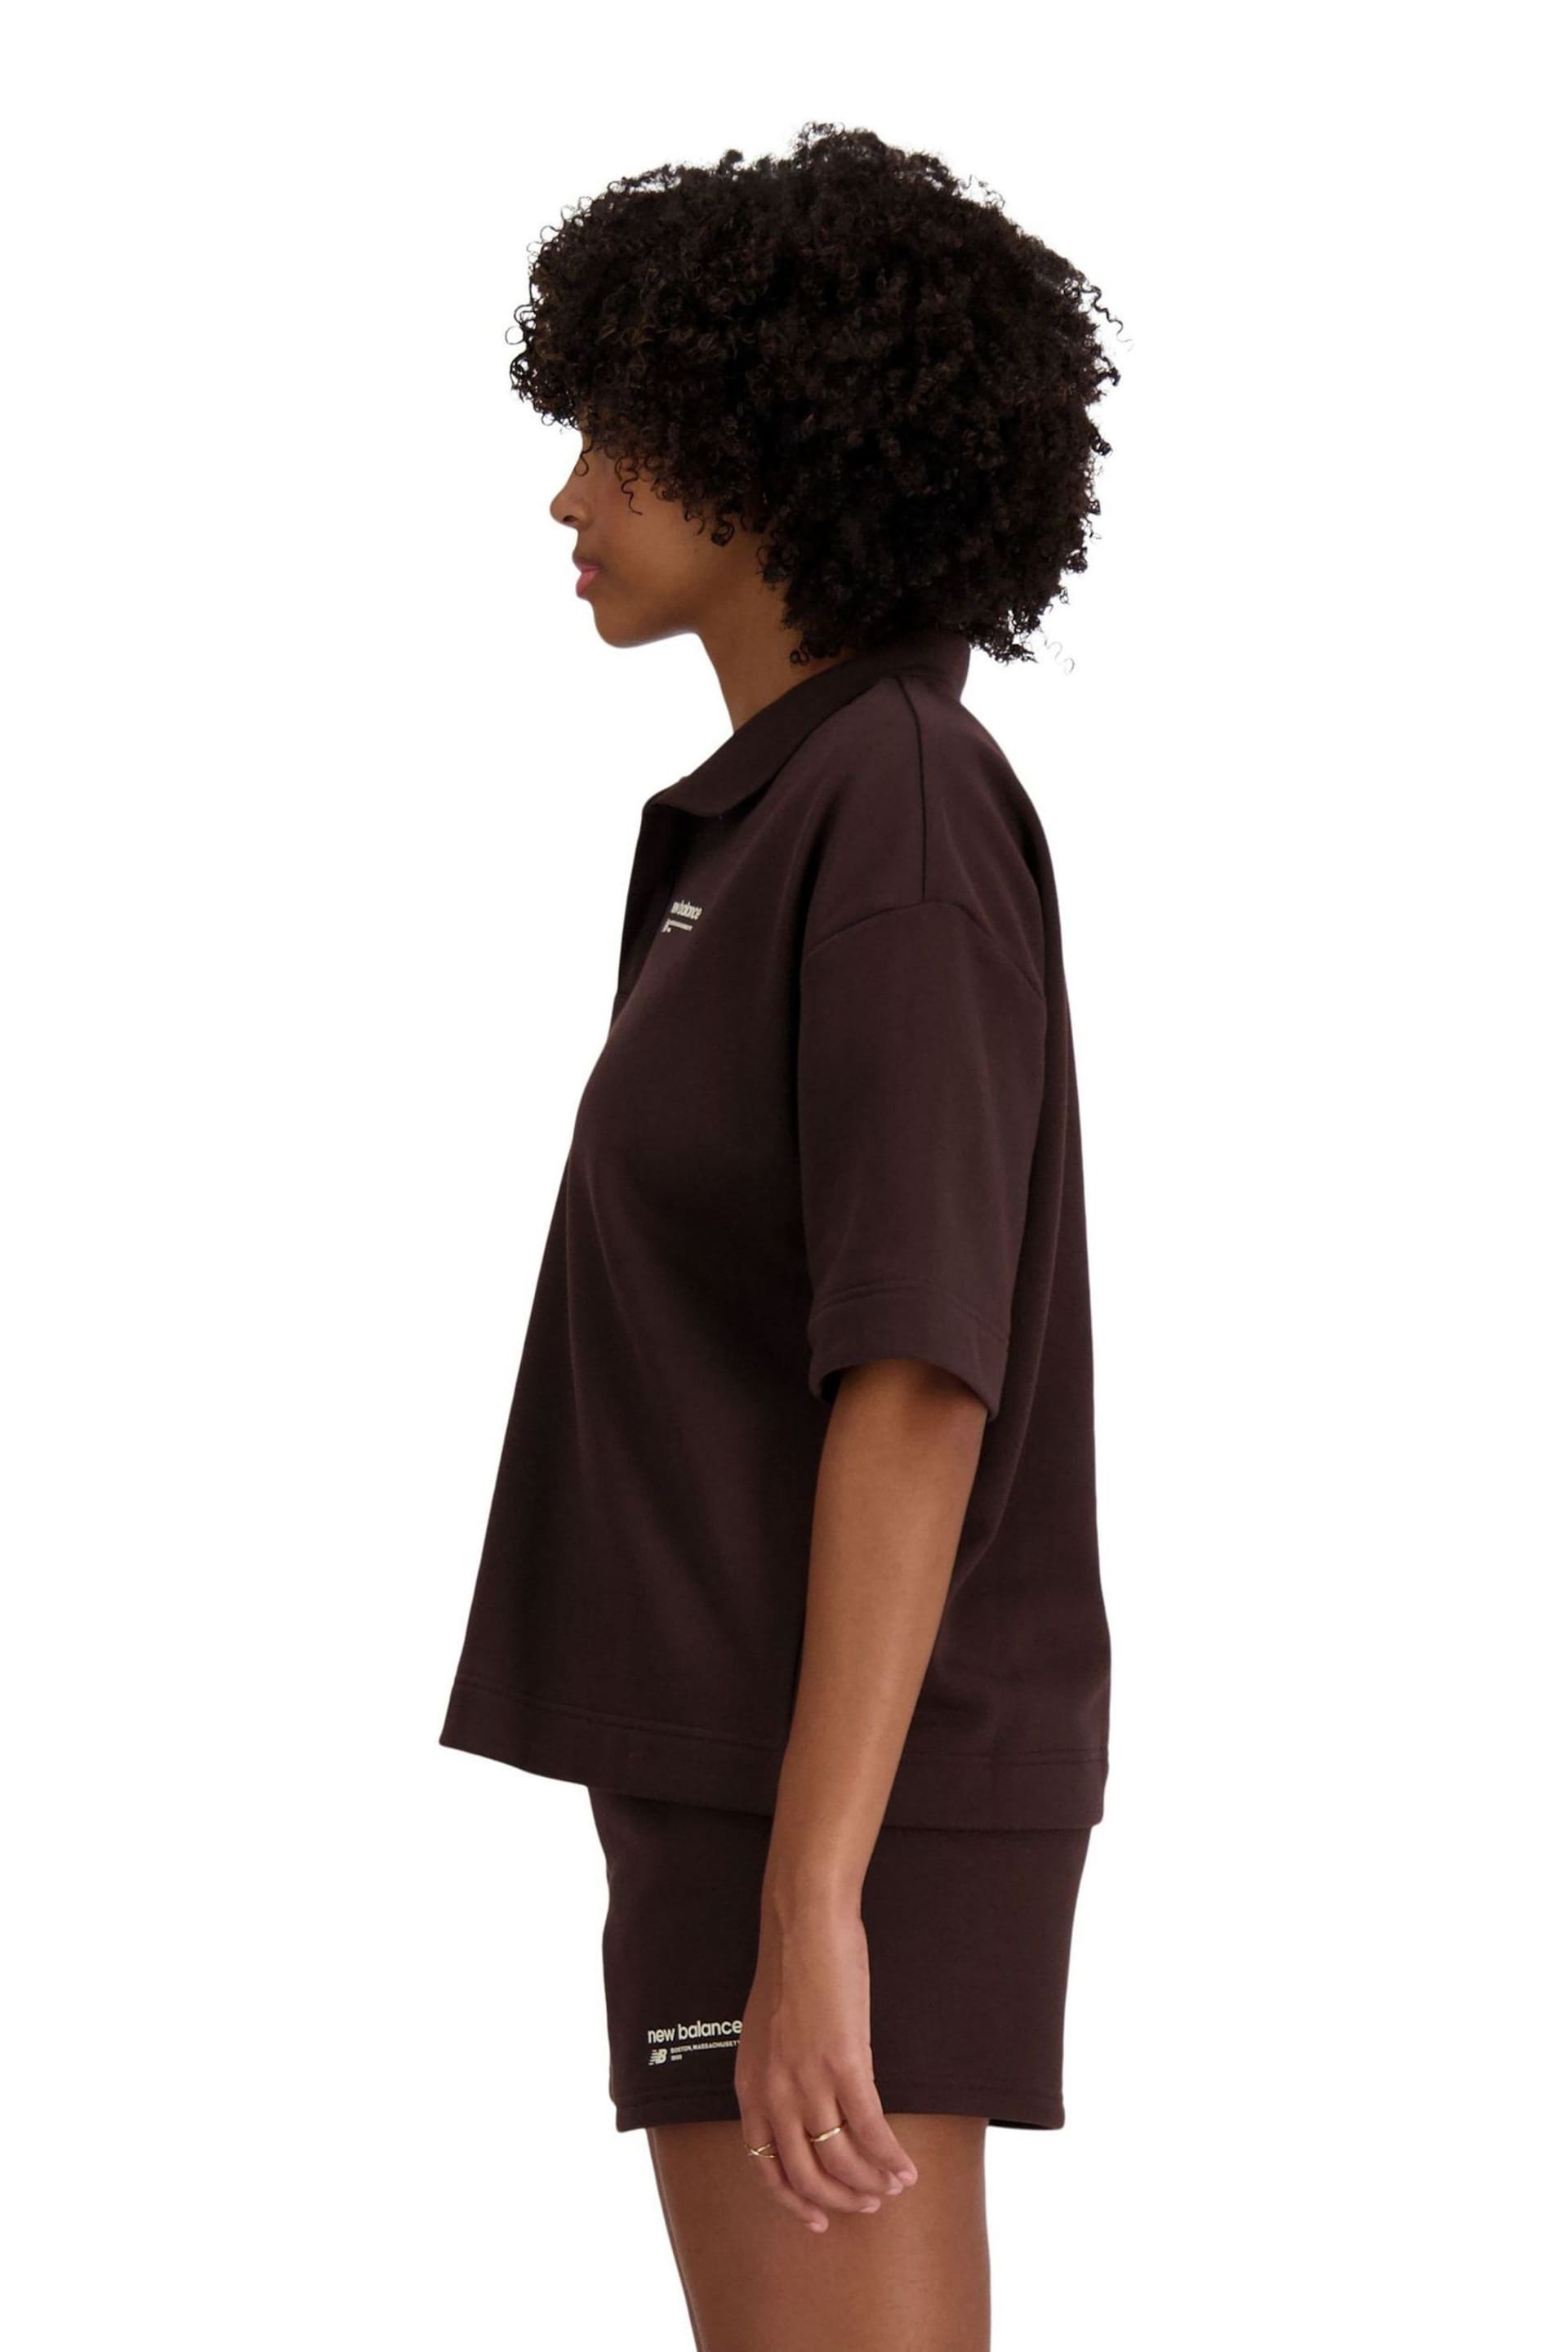 New Balance Brown Linear Heritage French Terry Polo Shirt - Image 3 of 5